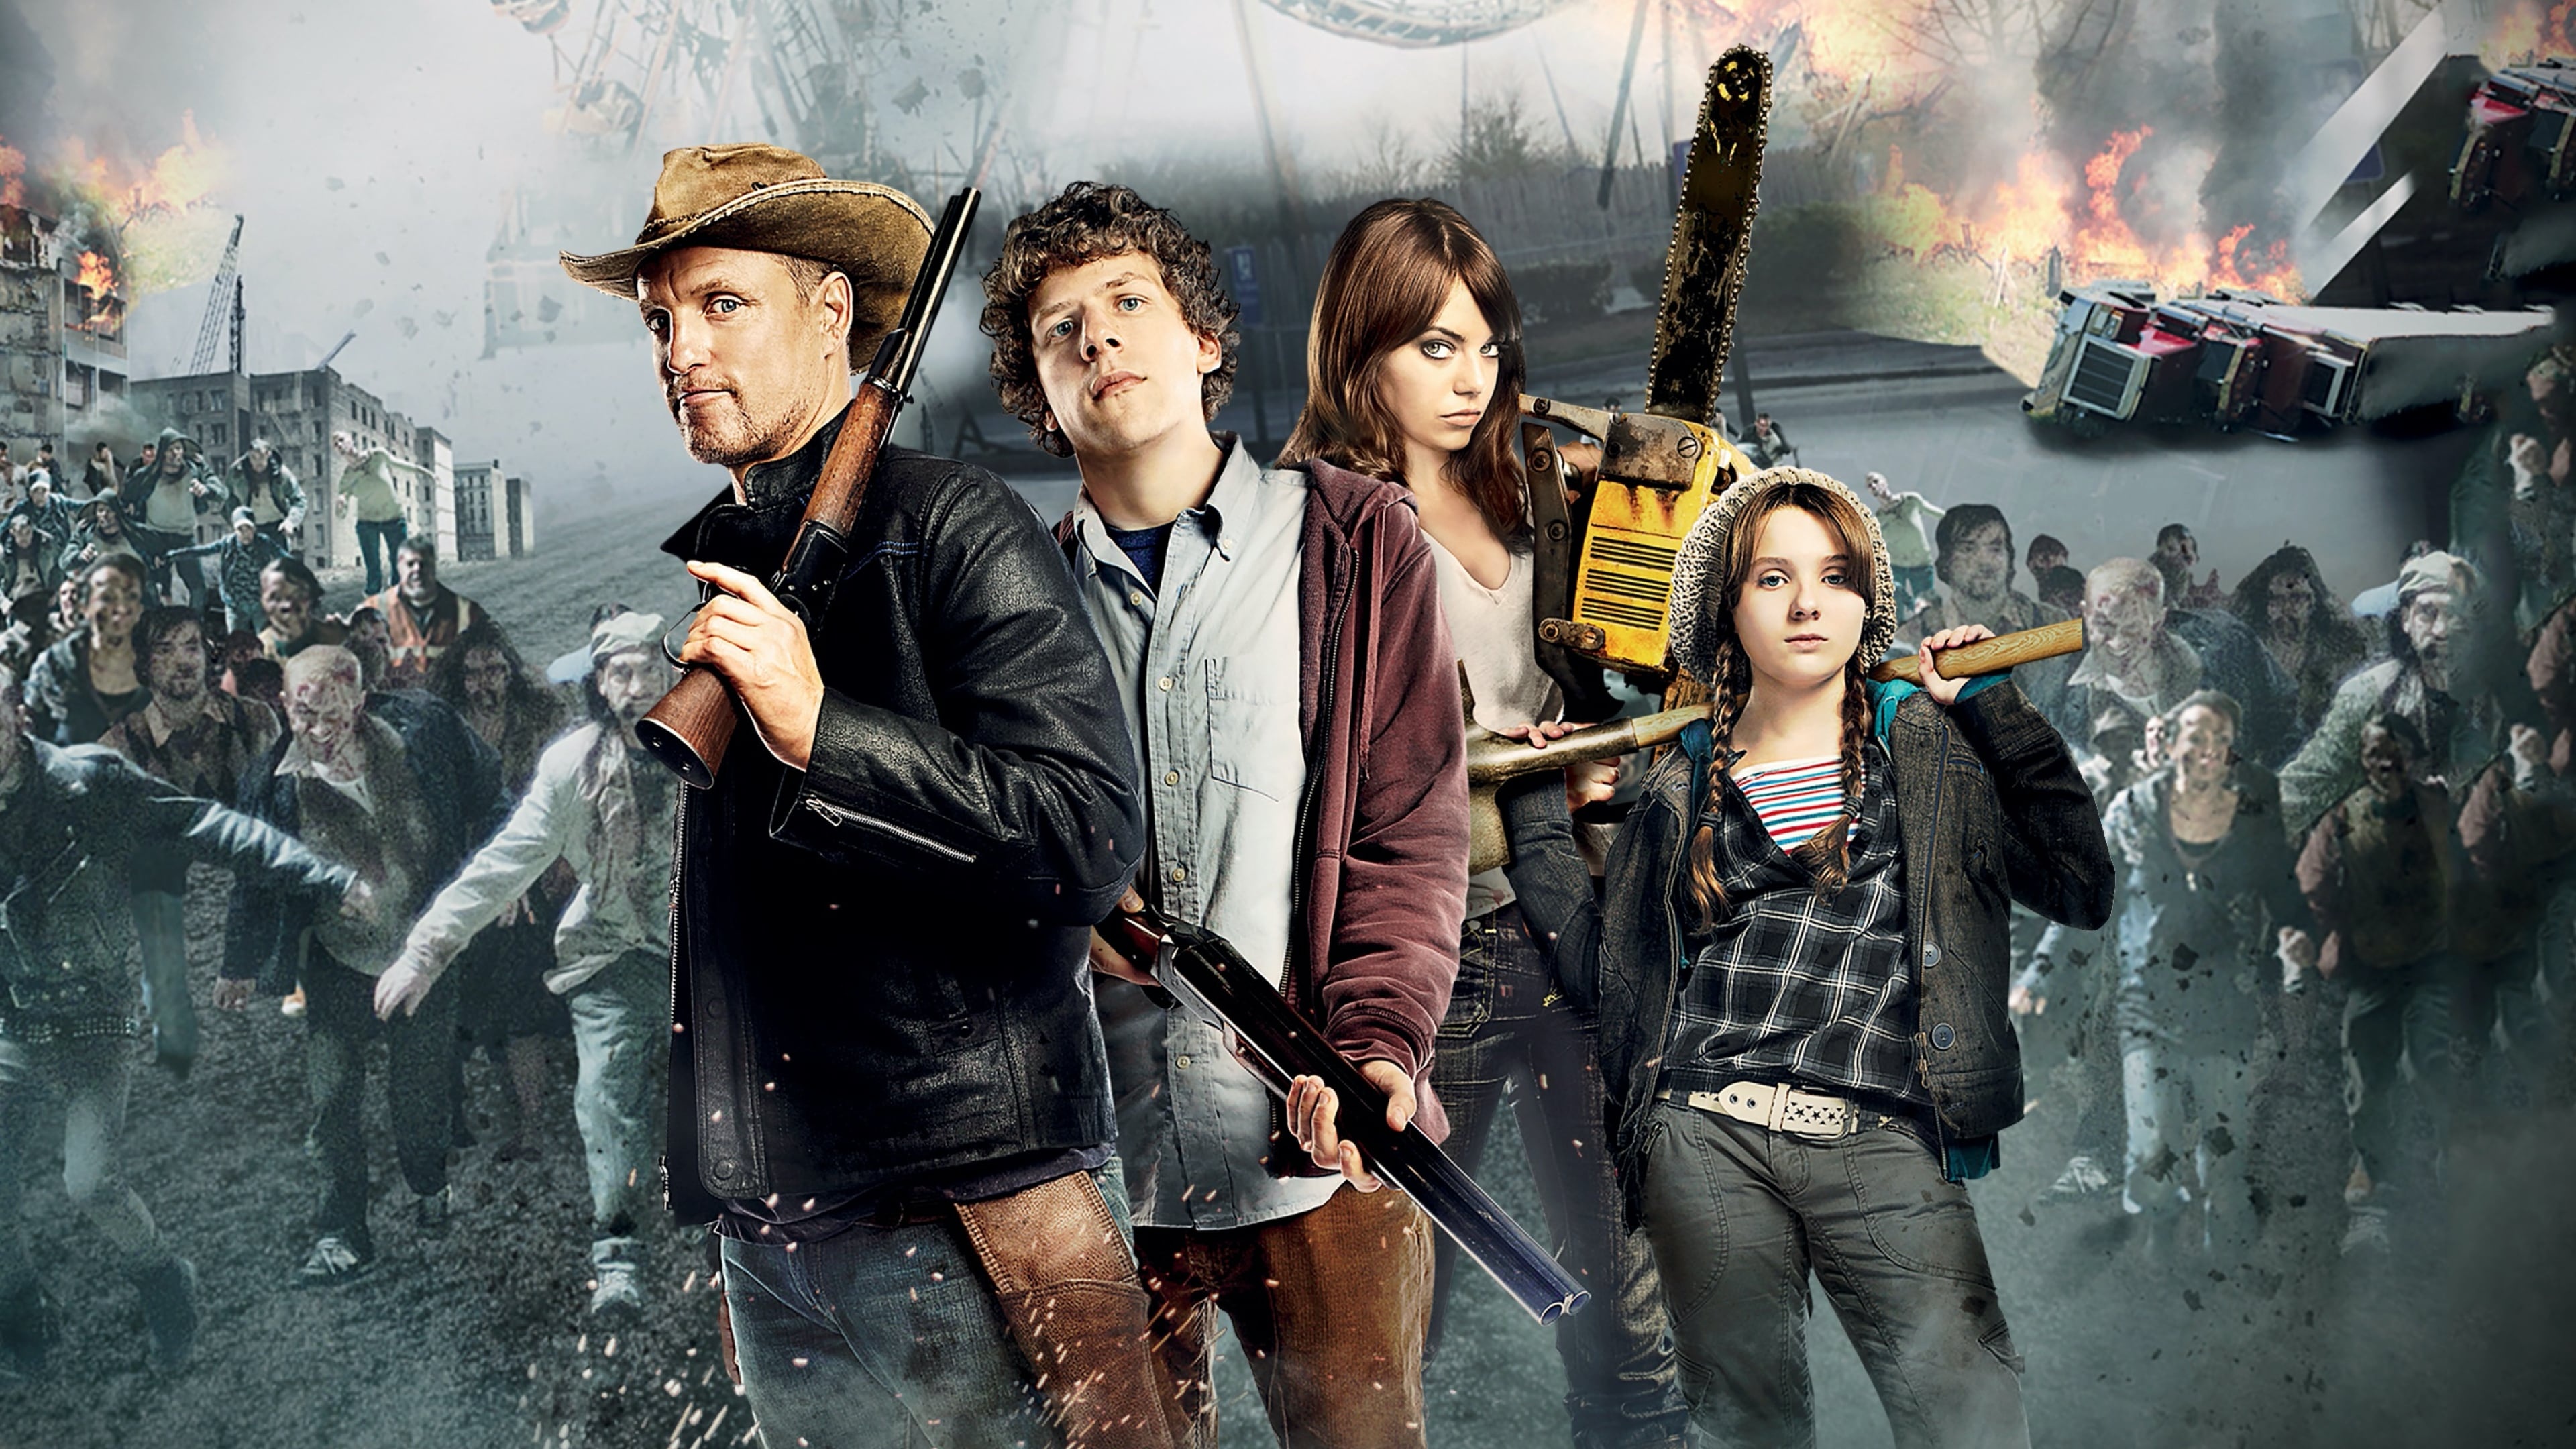 Zombieland: A 2009 American post-apocalyptic zombie comedy film directed by Ruben Fleischer. 3840x2160 4K Wallpaper.